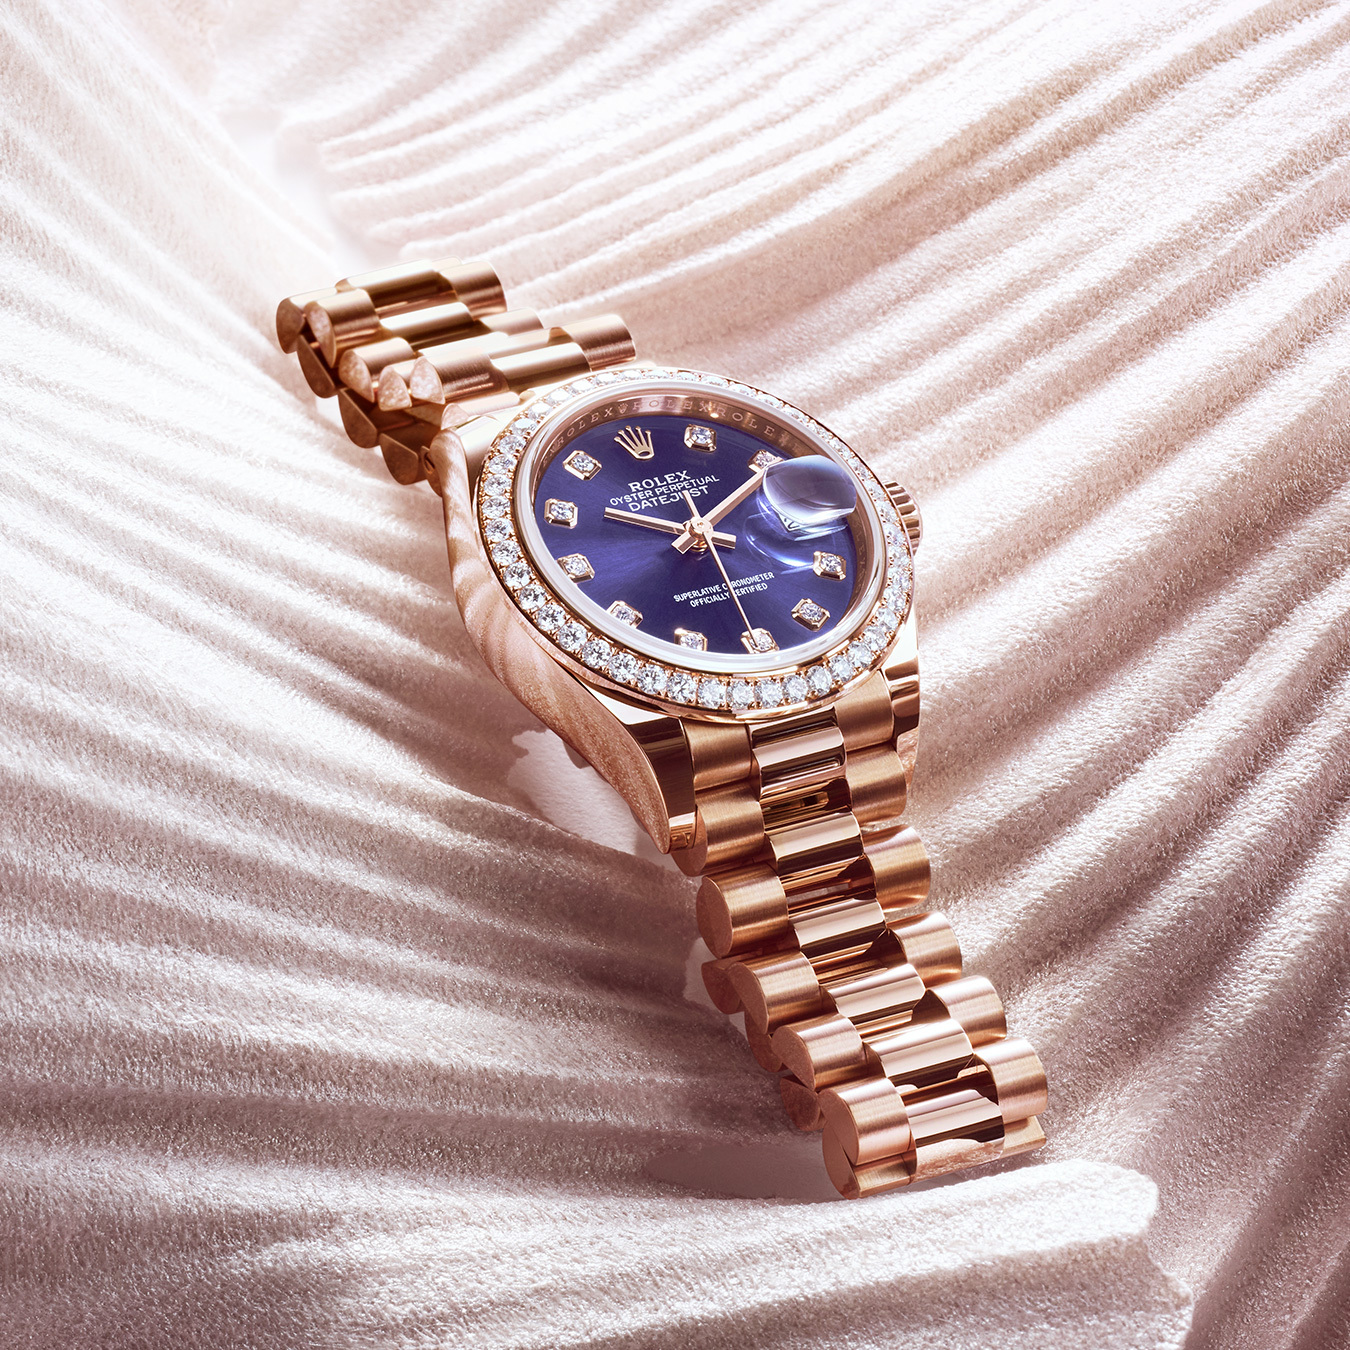 Rolex Lady-Datejust in Rolesor with blue dial and diamond indices